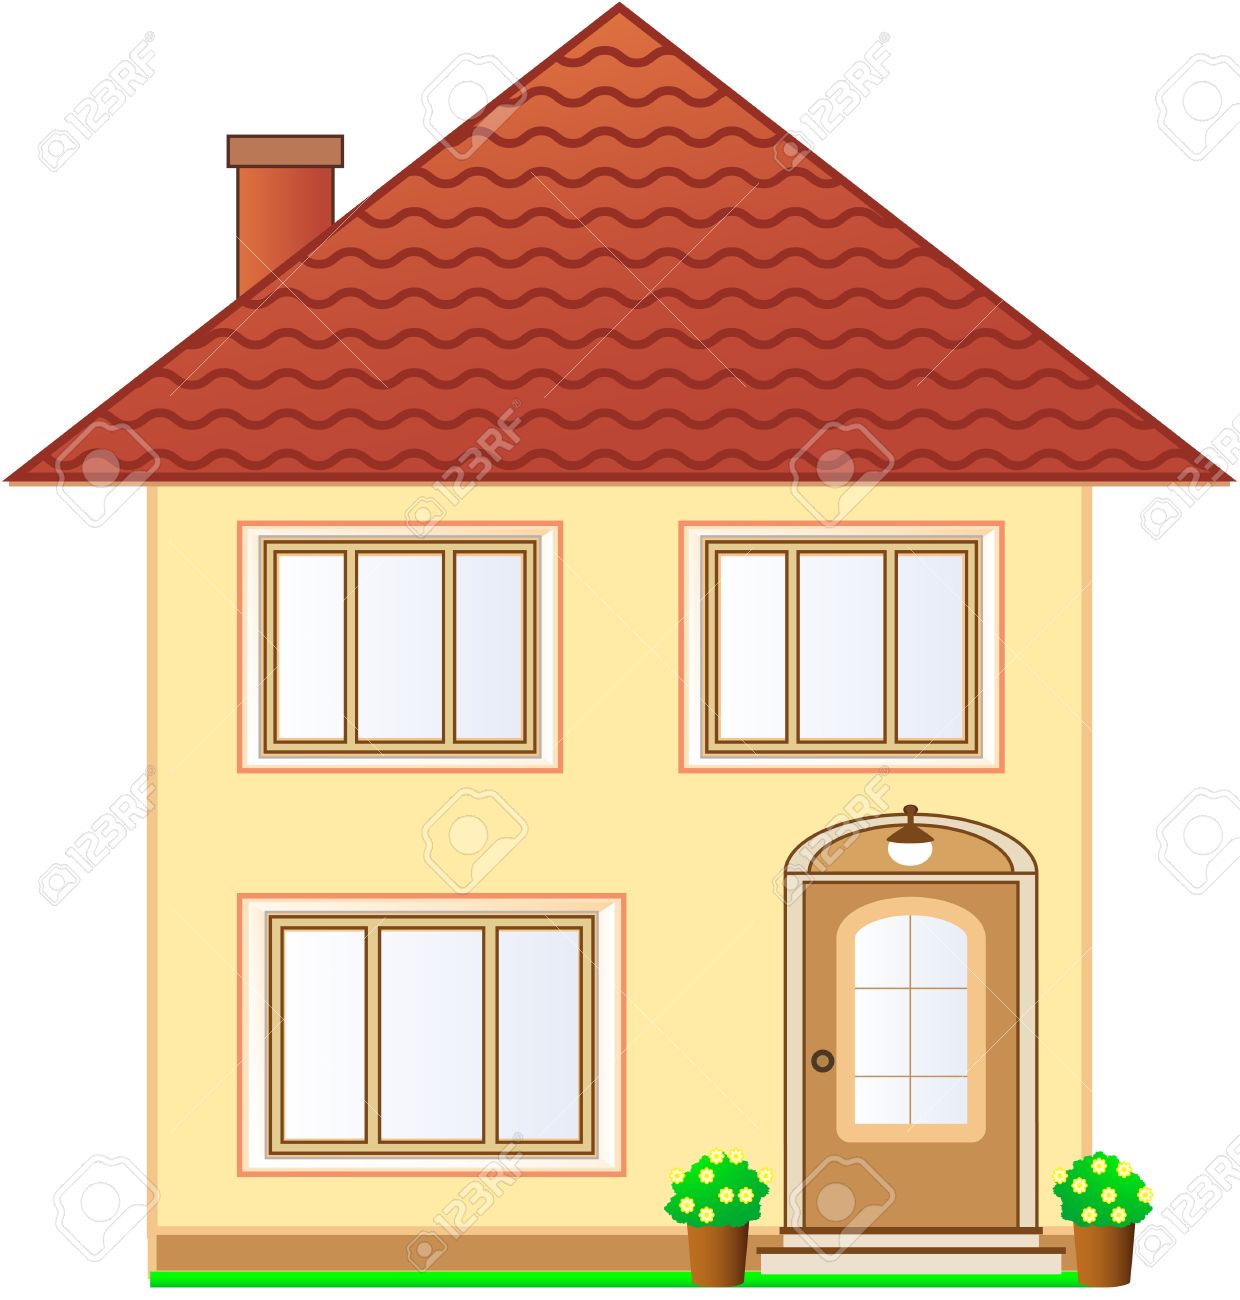 two story house clipart - photo #24